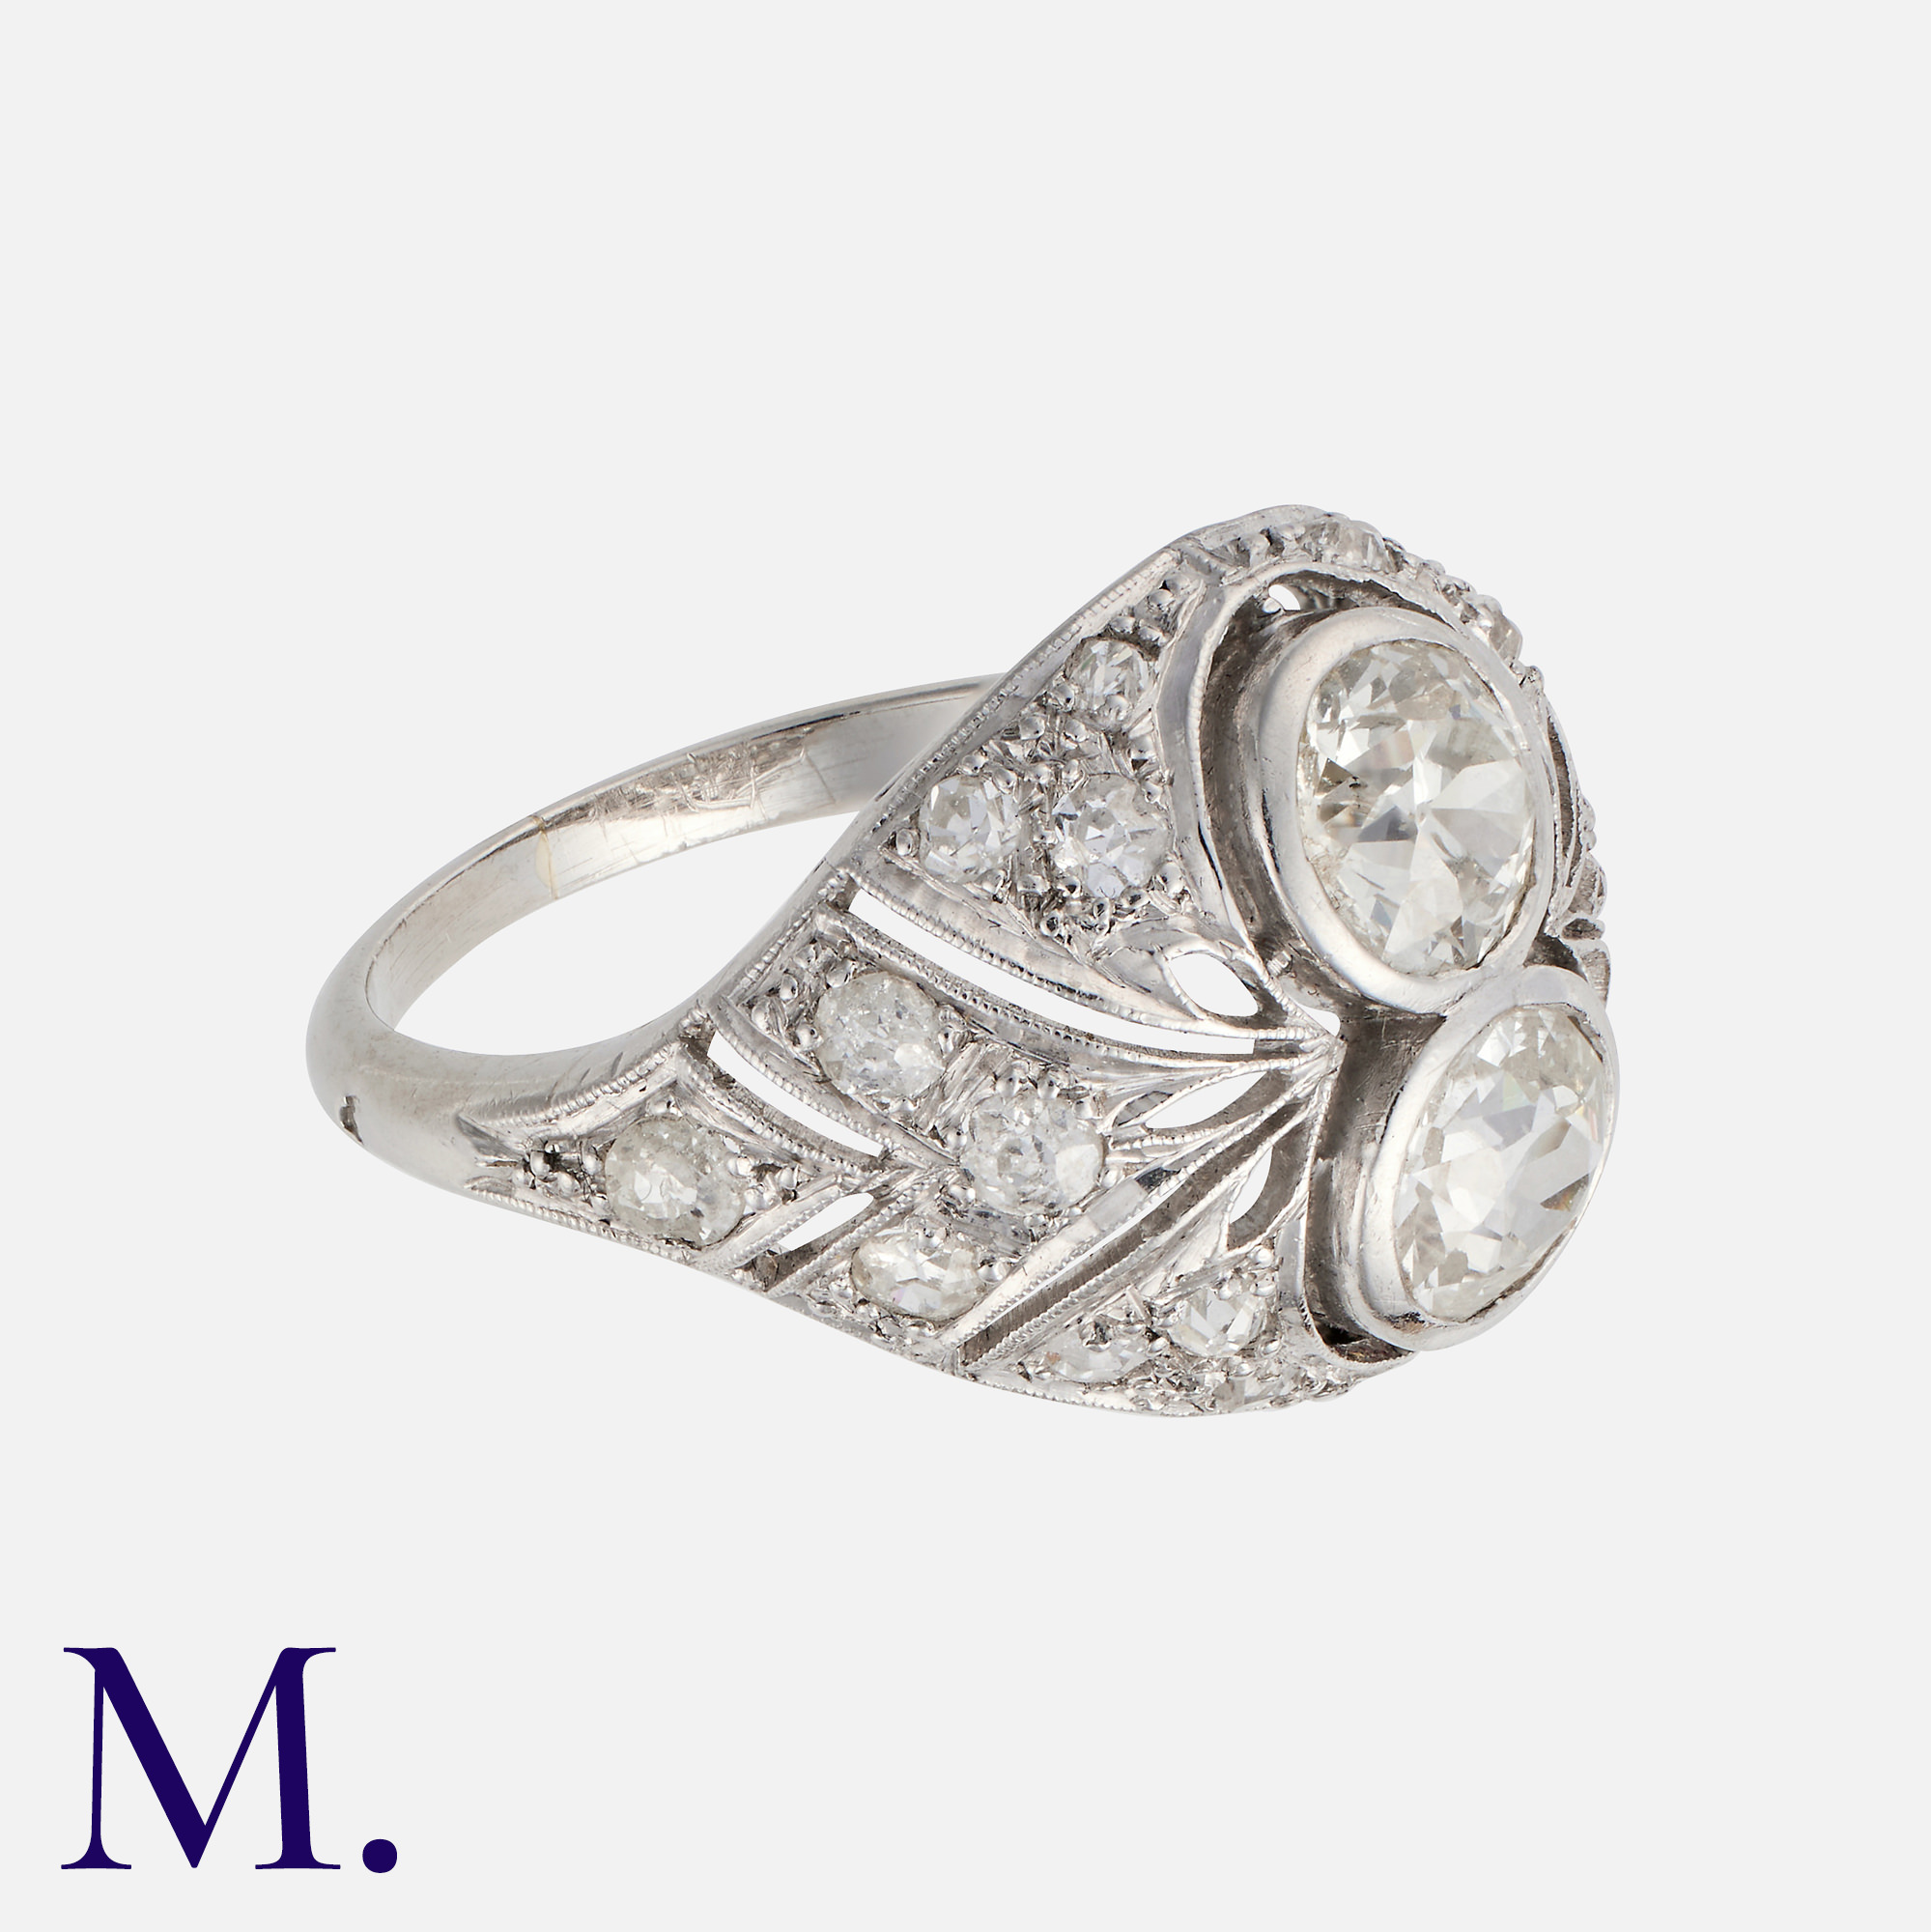 An Art Deco French Diamond Bombe Ring in platinum set with two old cut diamonds of approximately 0. - Image 2 of 2